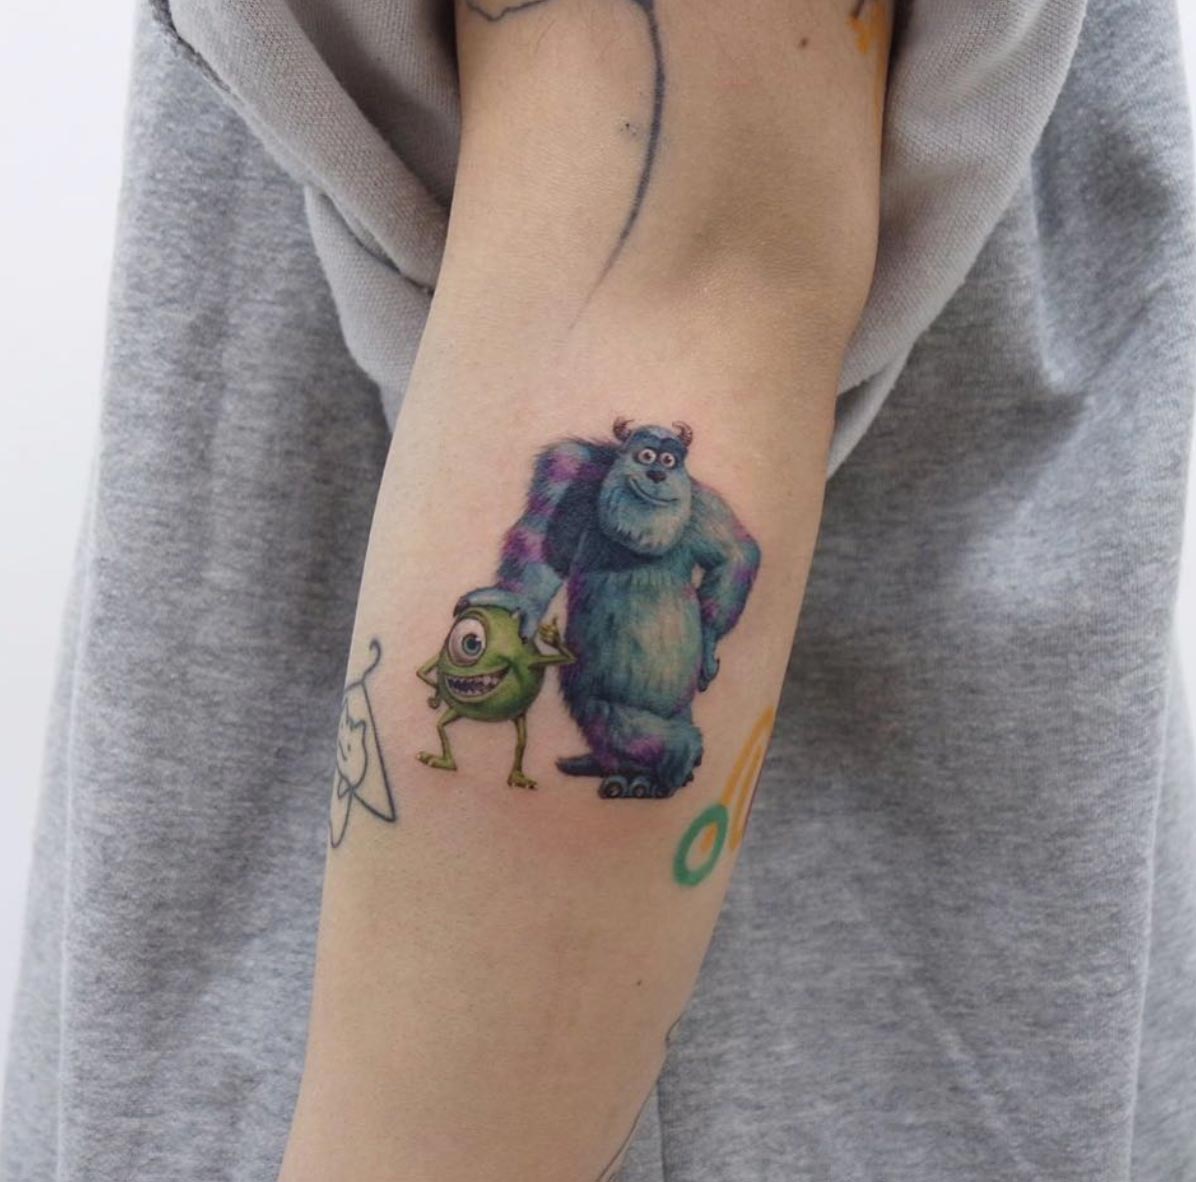 Monsters Inc tattoo by Youyeon